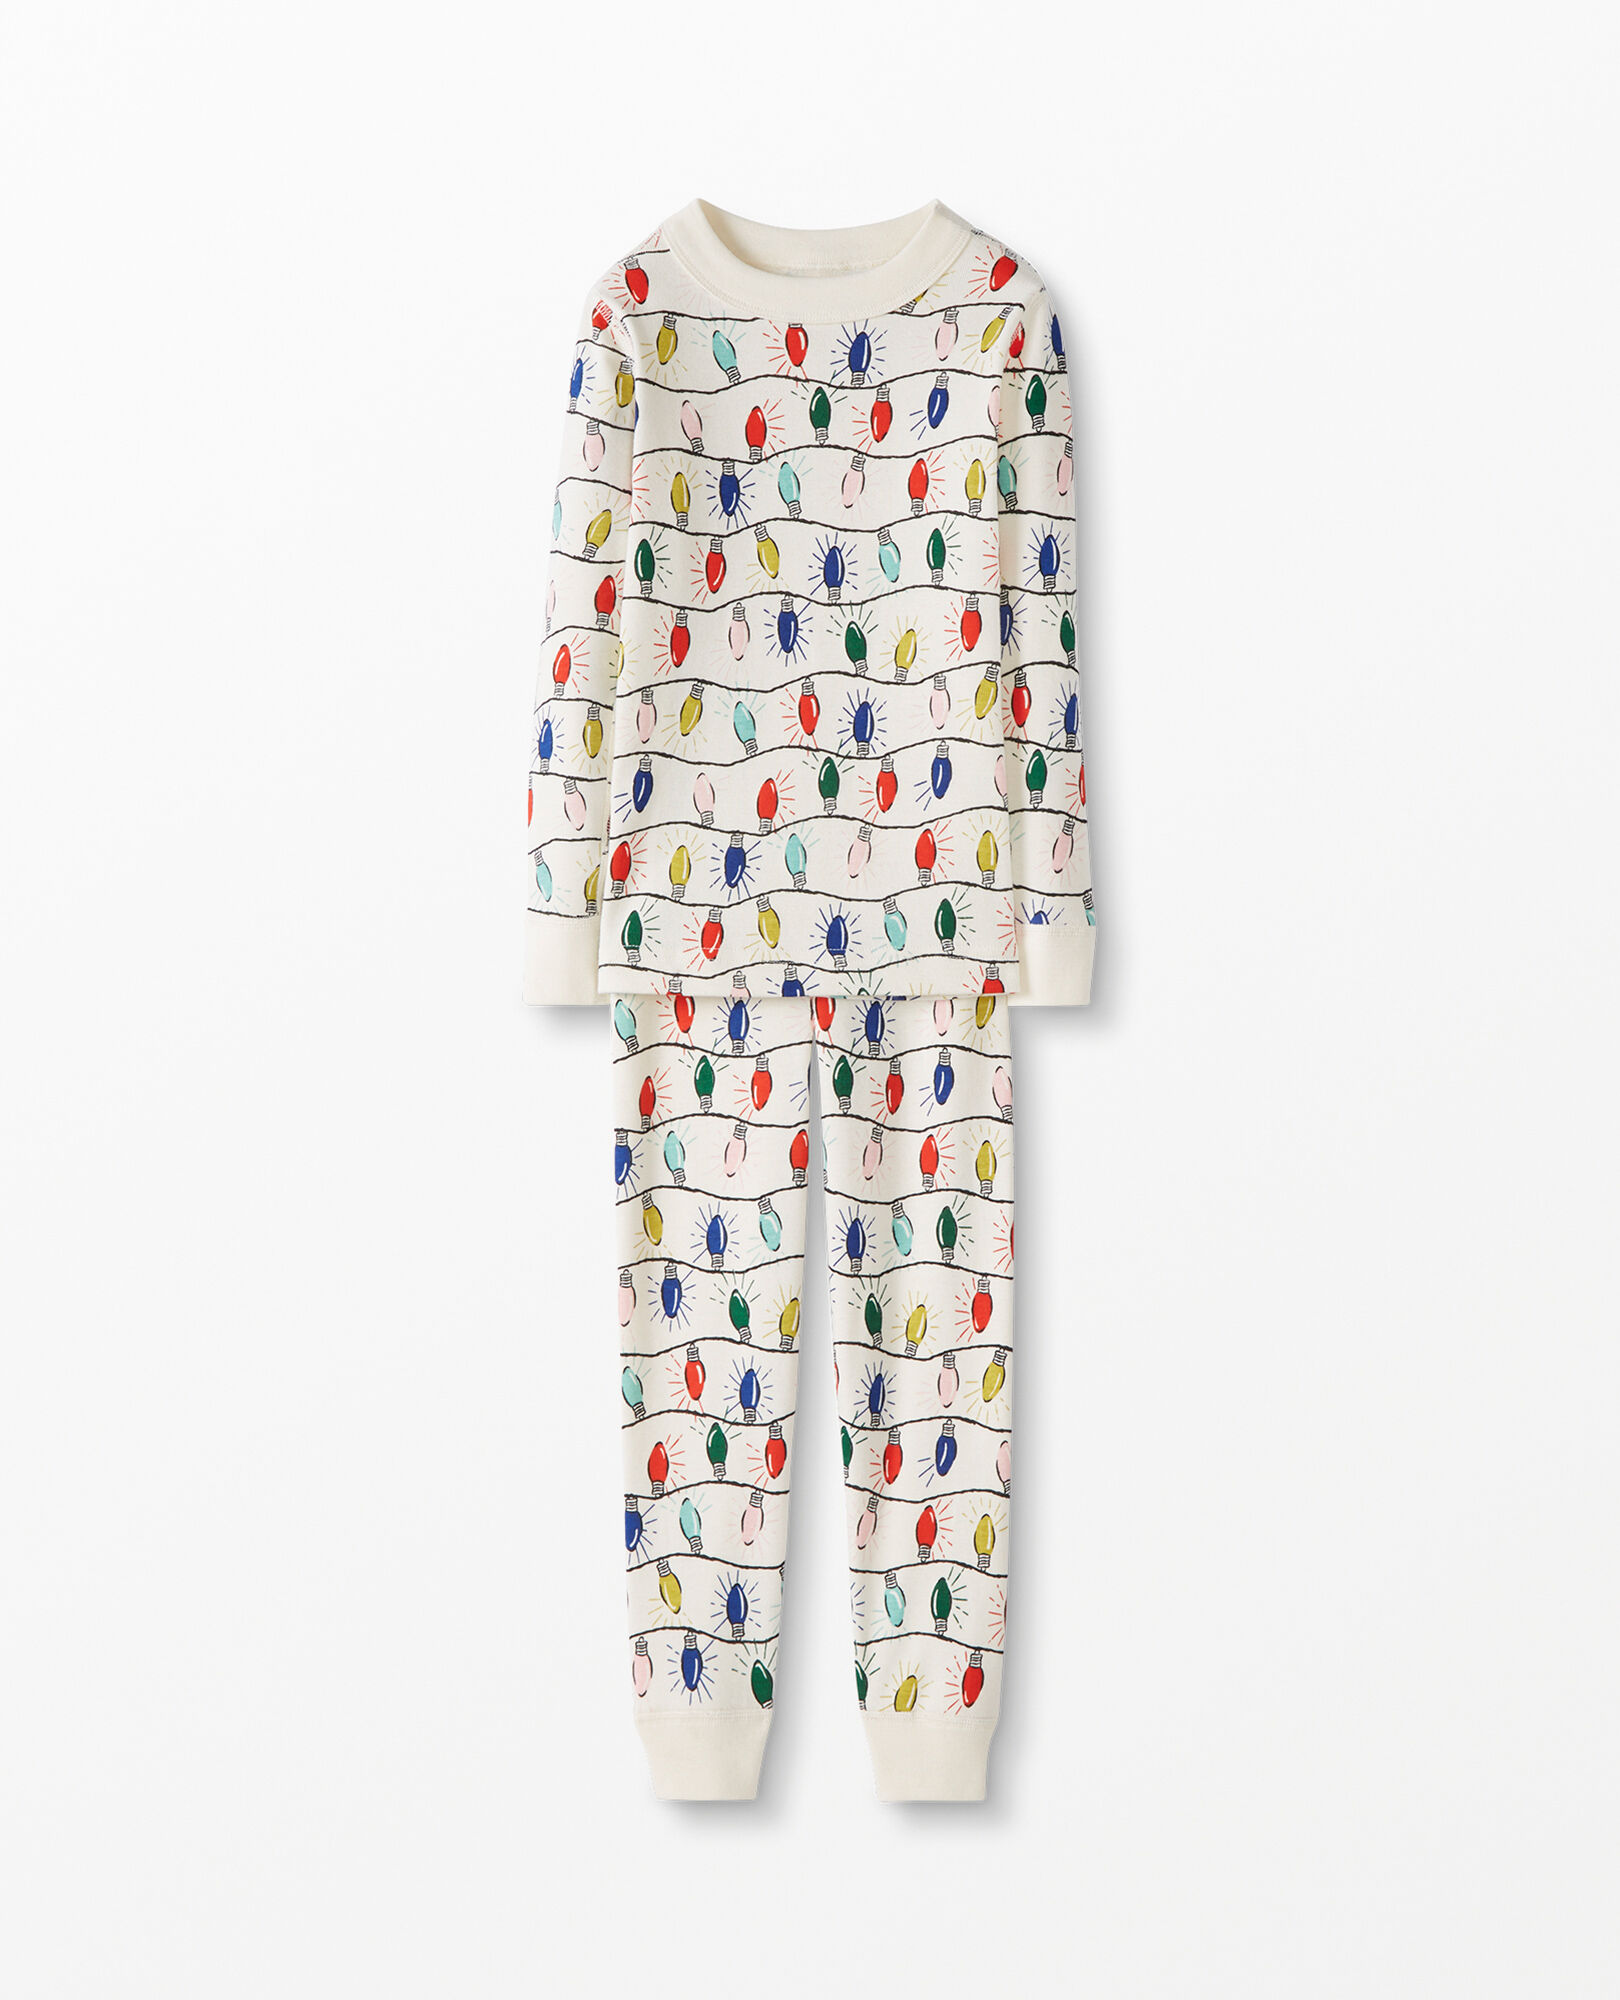 3 Years Red/Green Star Organic Cotton One Piece Footless Pajamas Moon and Back by Hanna Andersson 